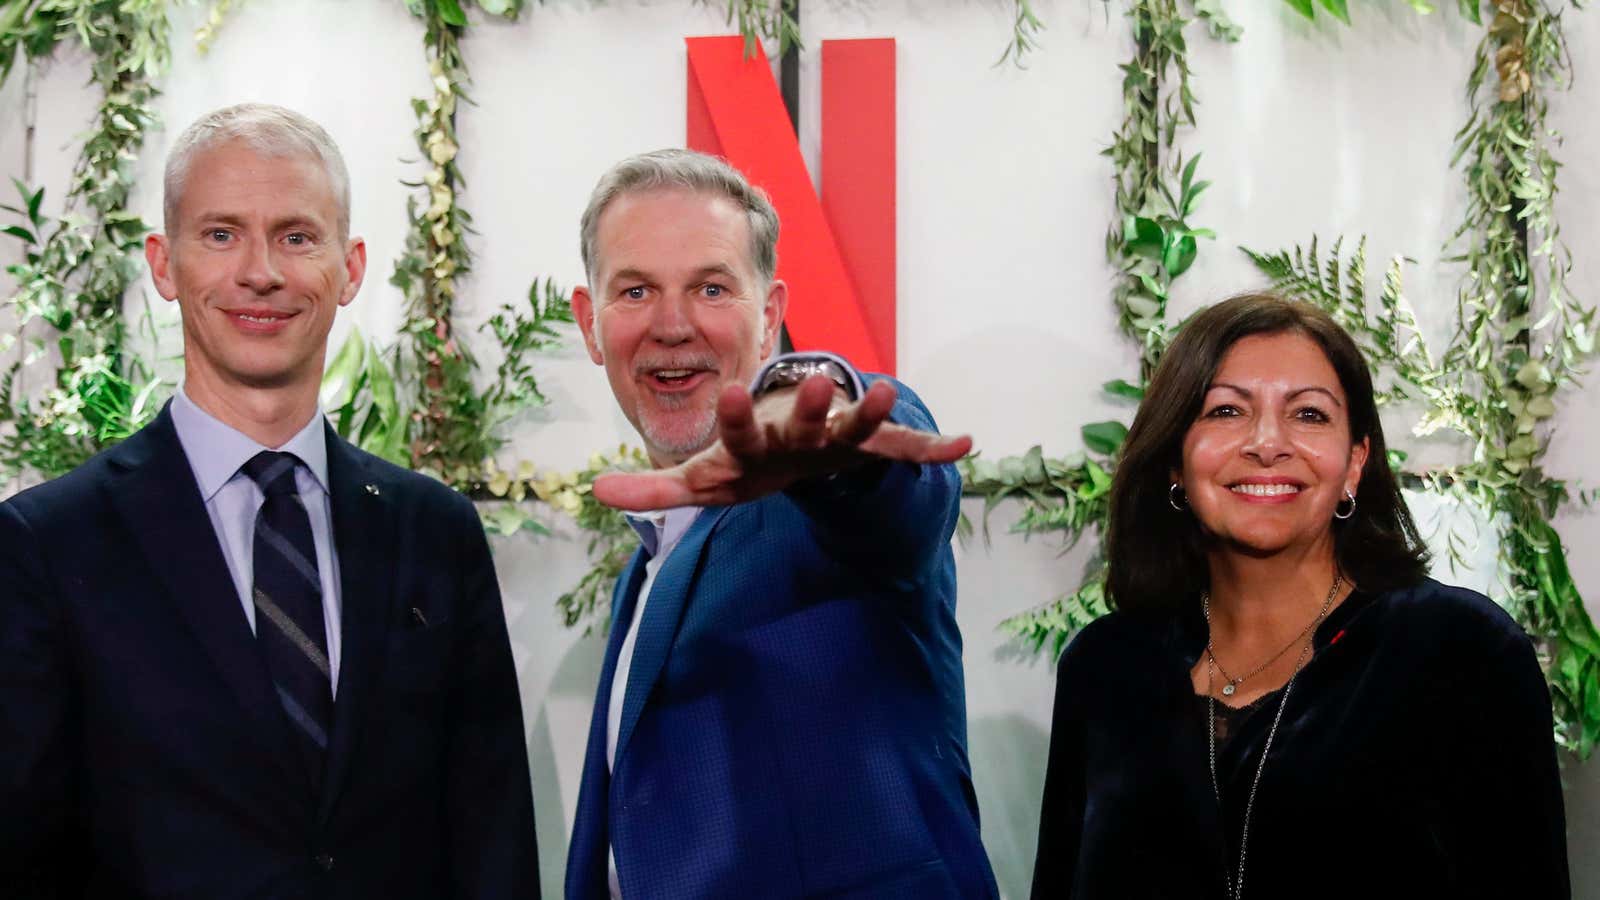 French Culture Minister Franck Riester, Reed Hastings, co-founder and CEO of Netflix and Paris Mayor Anne Hidalgo attend the inauguration of Netflix new offices in Paris in January.